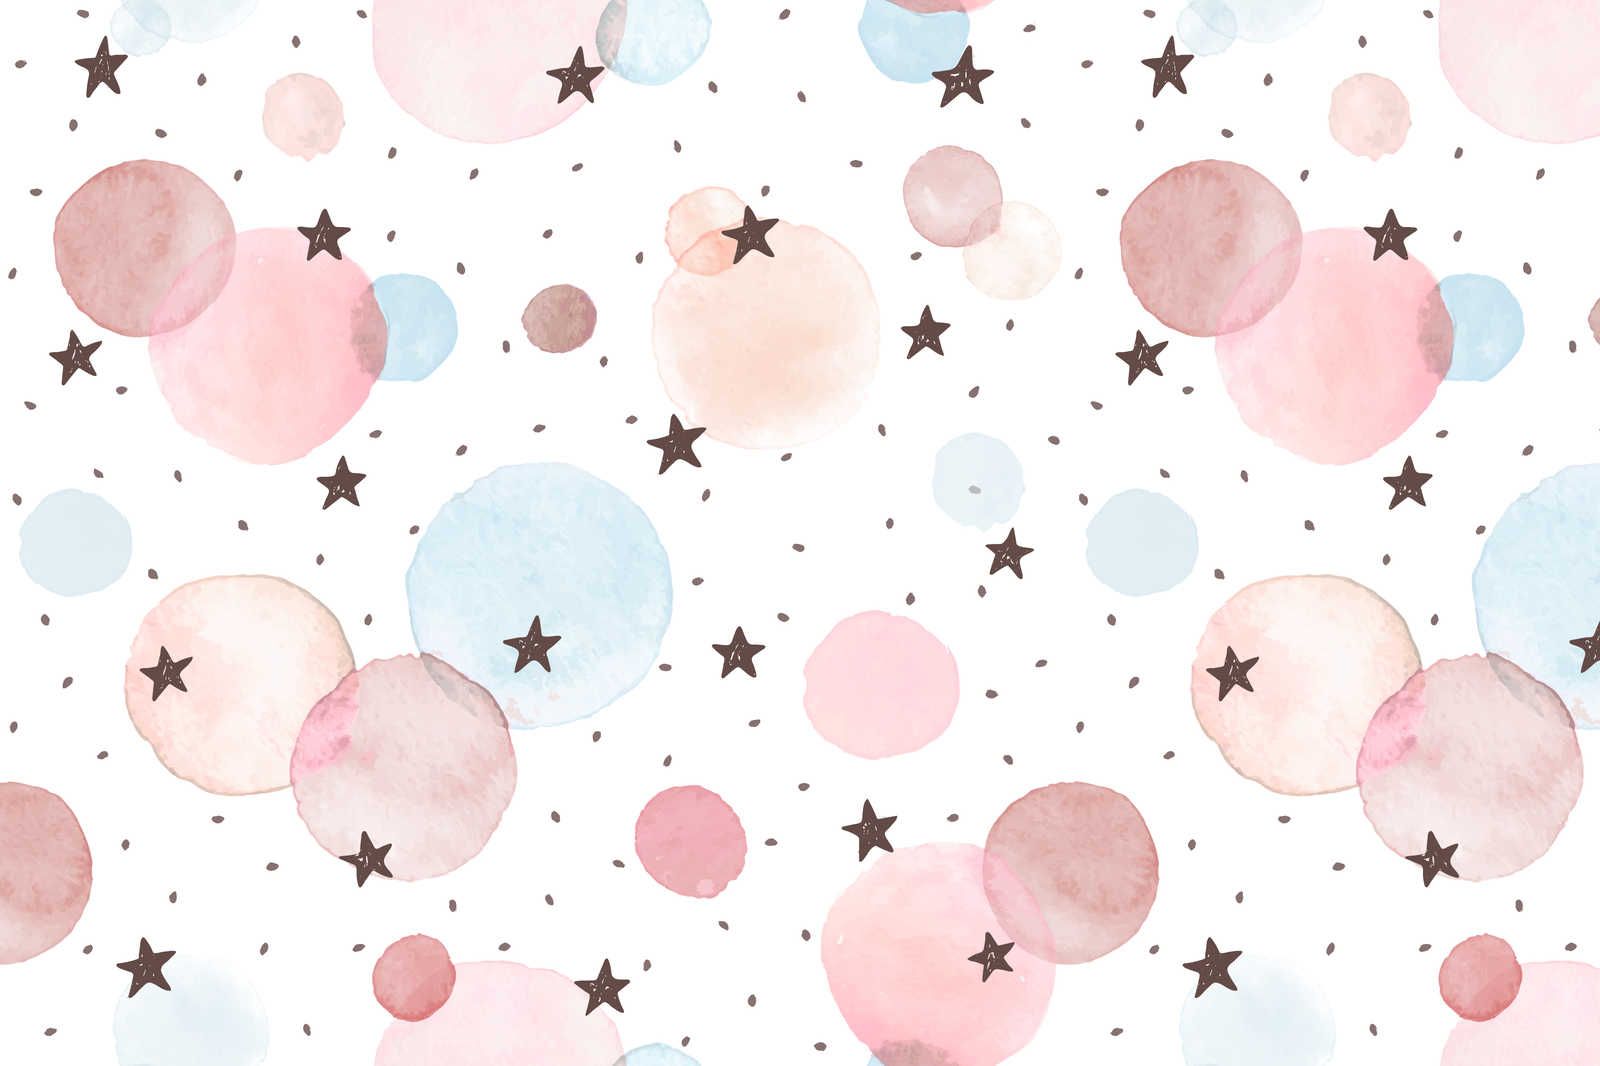             Canvas for children's room with stars, dots and circles - 120 cm x 80 cm
        